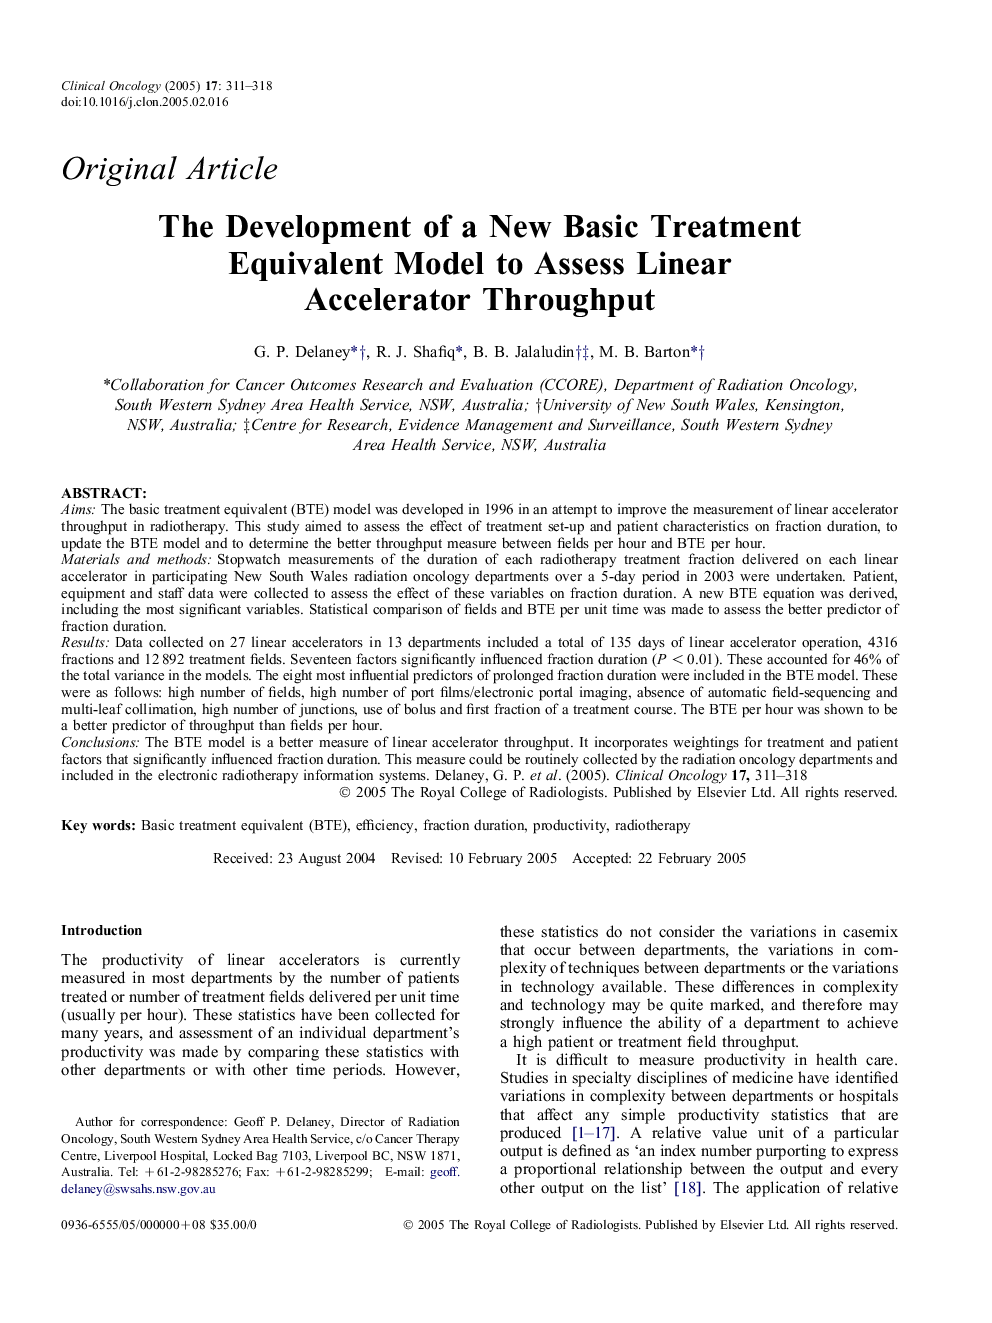 The Development of a New Basic Treatment Equivalent Model to Assess Linear Accelerator Throughput